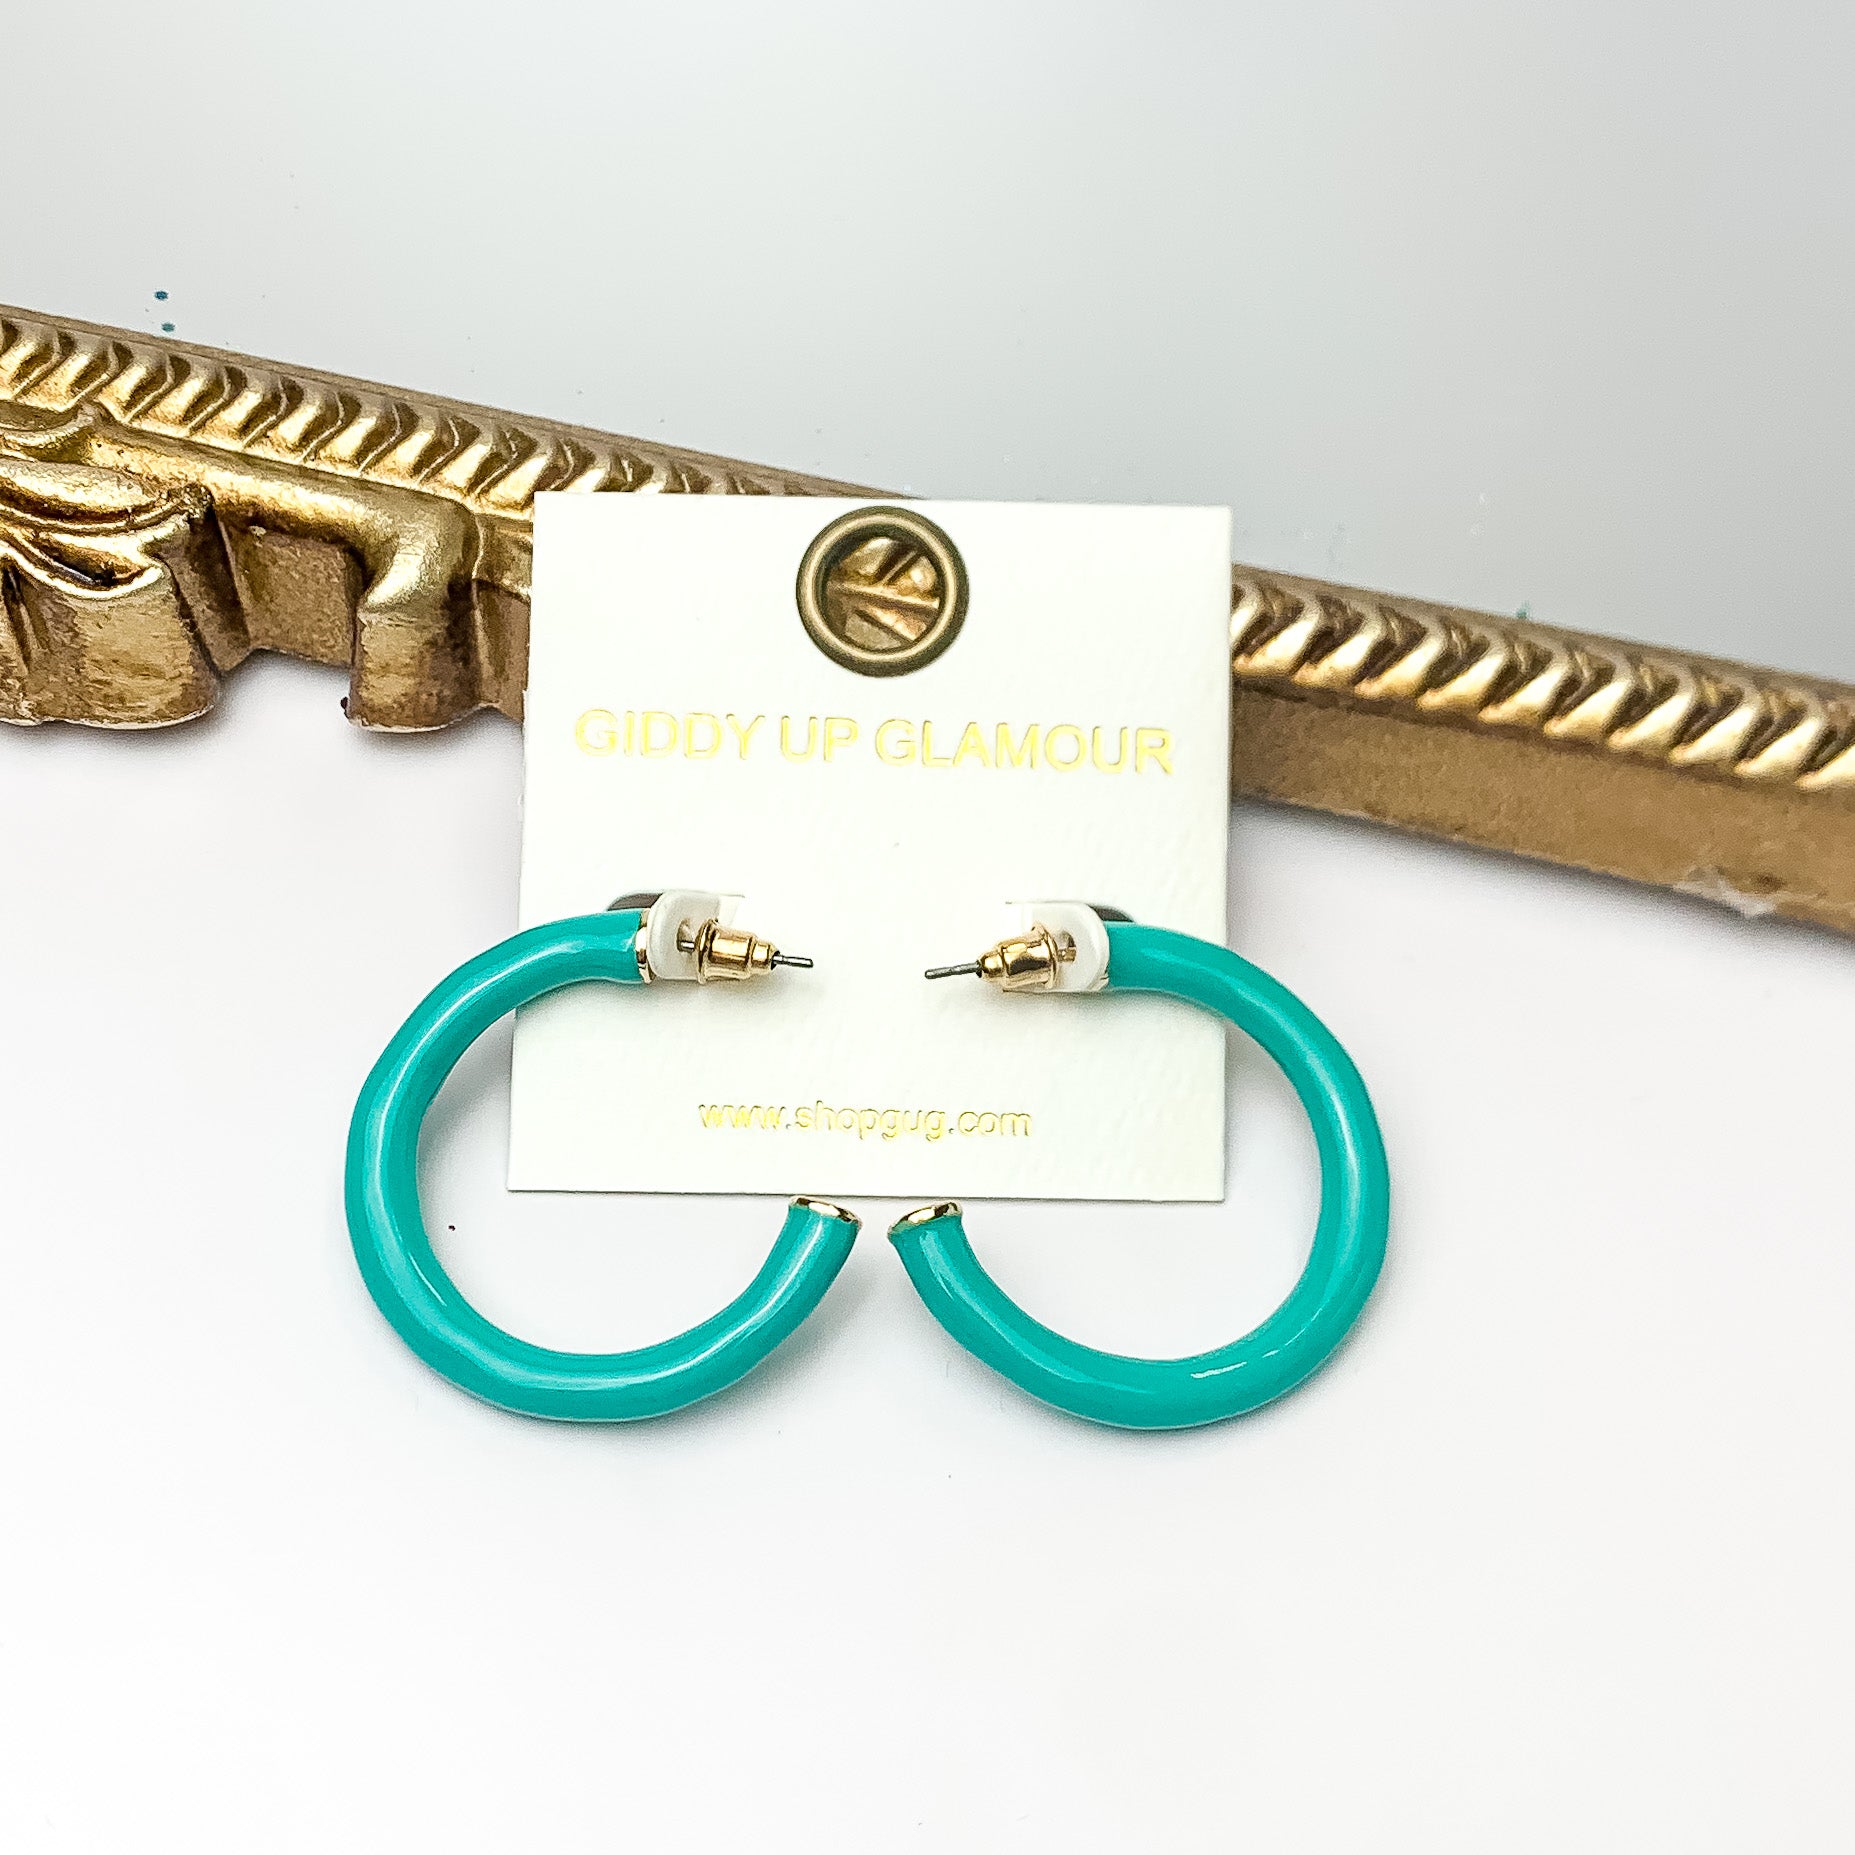 Plan For Cabo Small Hoop Earrings in Turquoise Green. Pictured on a white background with a gold frame behind the earrings.